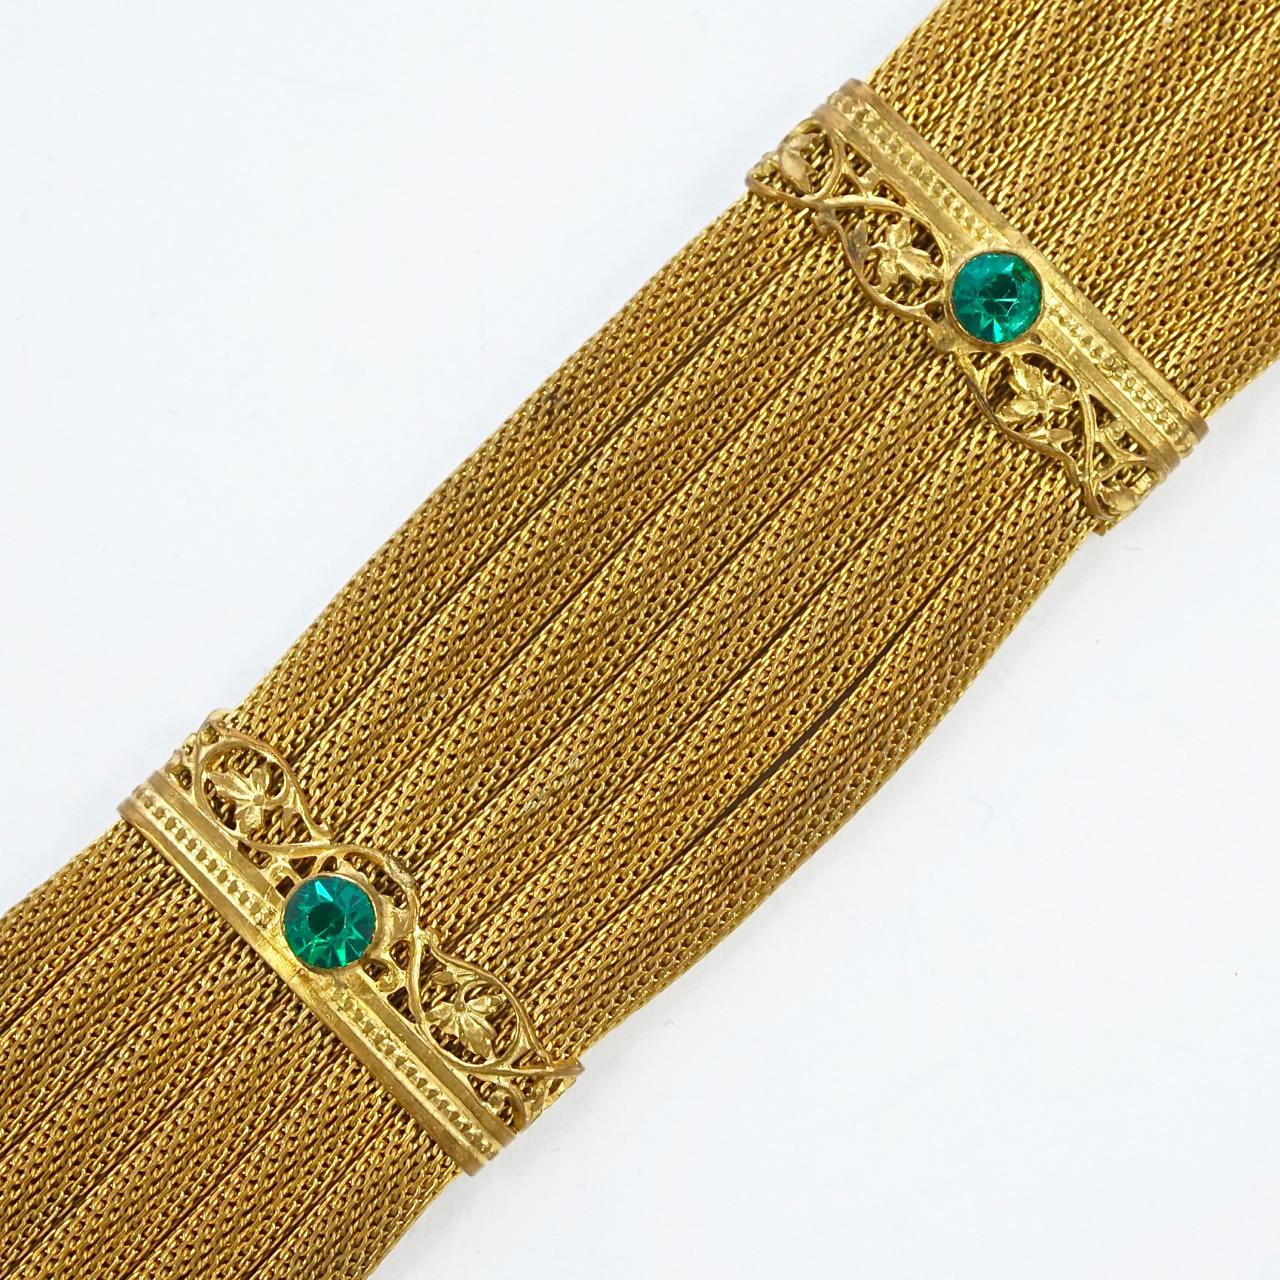 Women's or Men's Art Deco Gold Plated Mesh Bracelet with Green Jewels circa 1920s For Sale